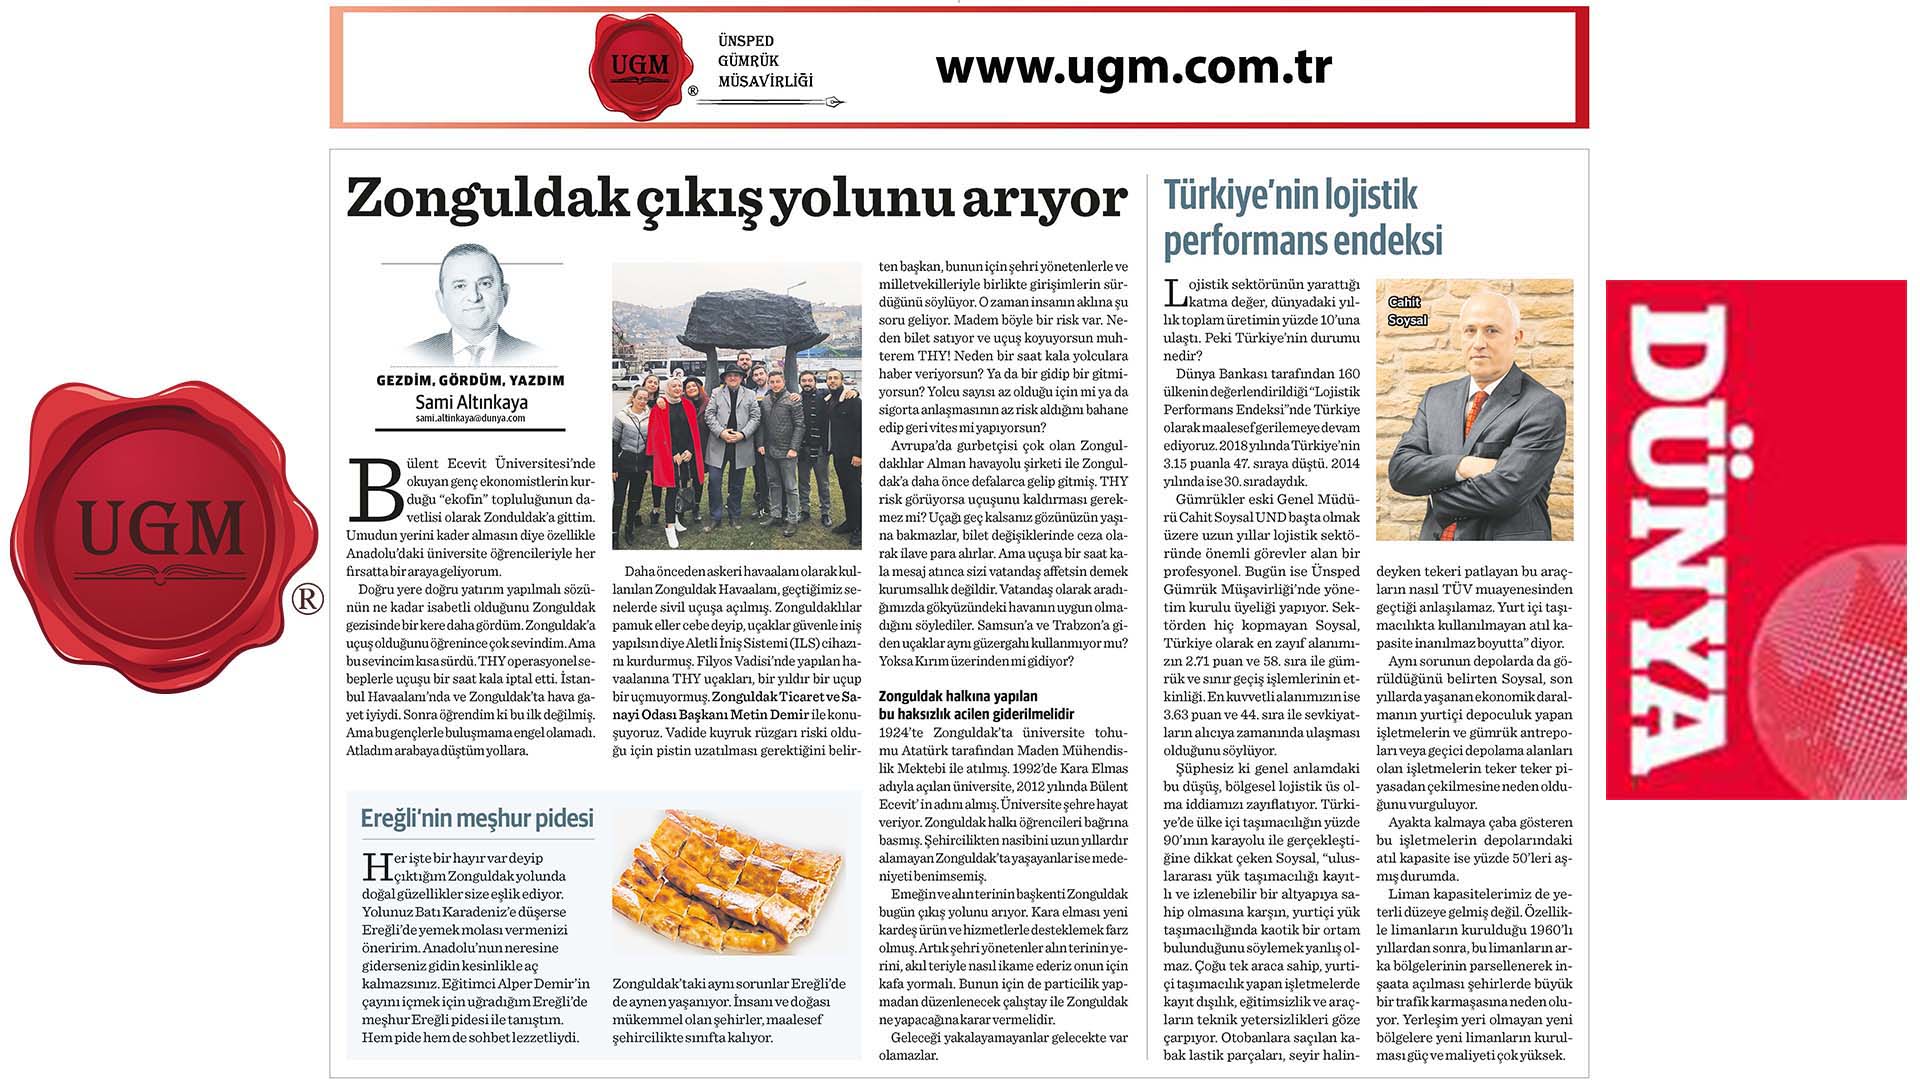 Our UGM Corporate Communications Director Mr. Sami ALTINKAYA's article titled "Zonguldak is Looking for the Way Out" was published in Dünya Newspaper on 17.02.2020.